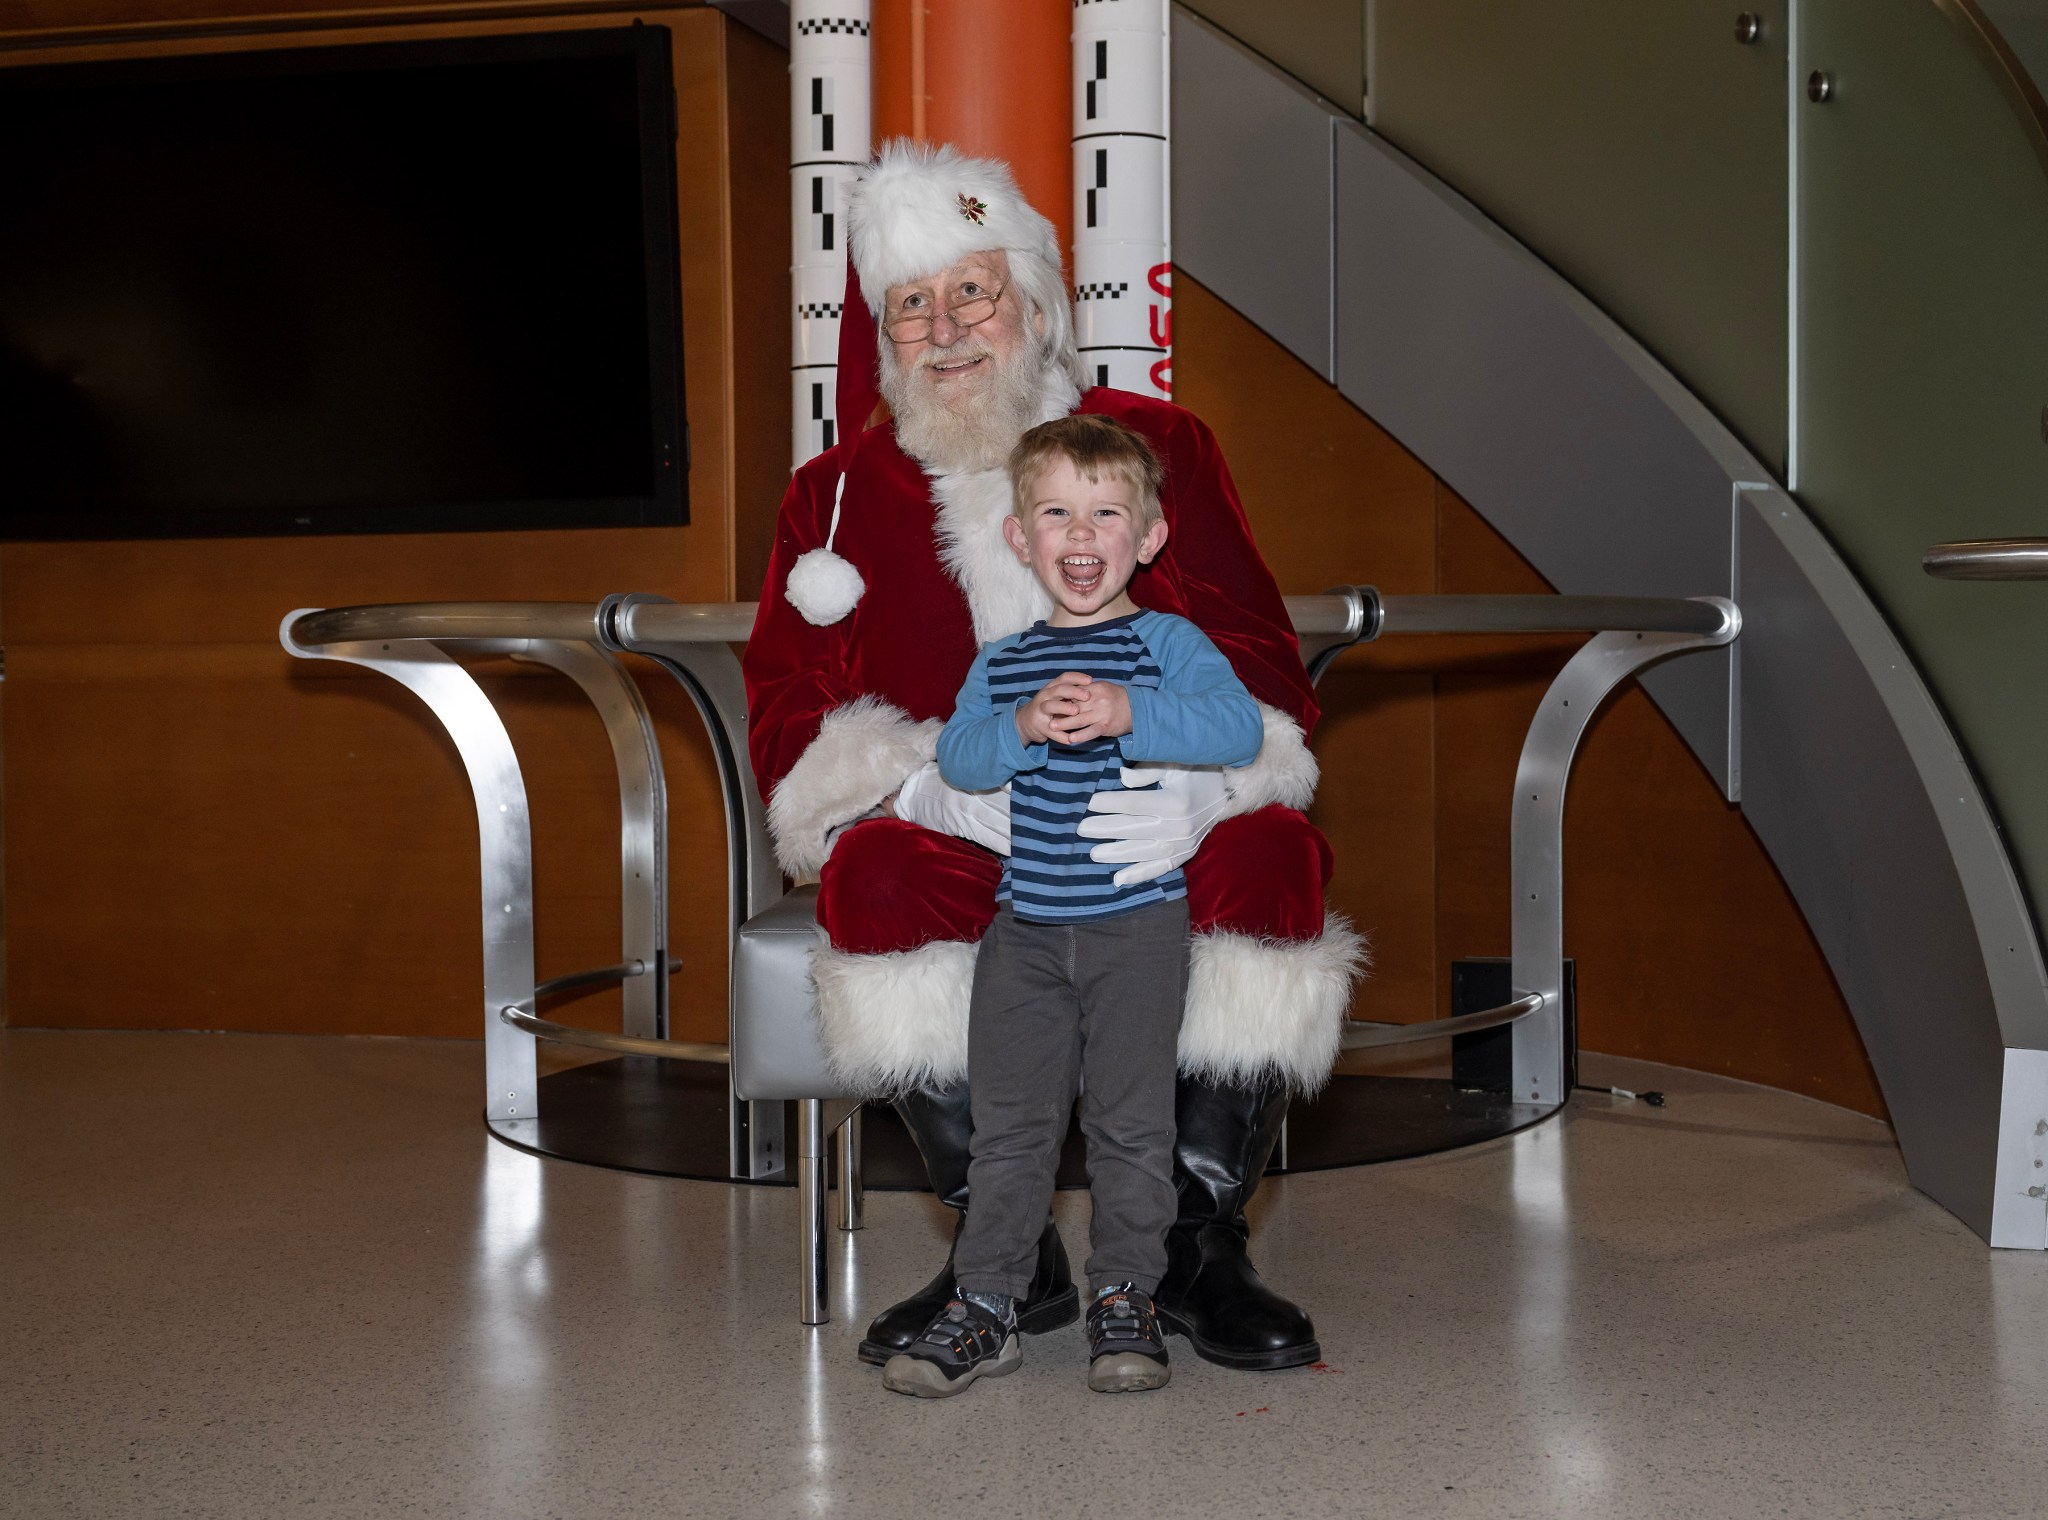 A young boy gleefully gives an open mouth smile after meeting Santa Claus. Children were given the chance to meet and take photos with Santa in the foray of Building 4221. There was also hot chocolate and cookies for attendees.